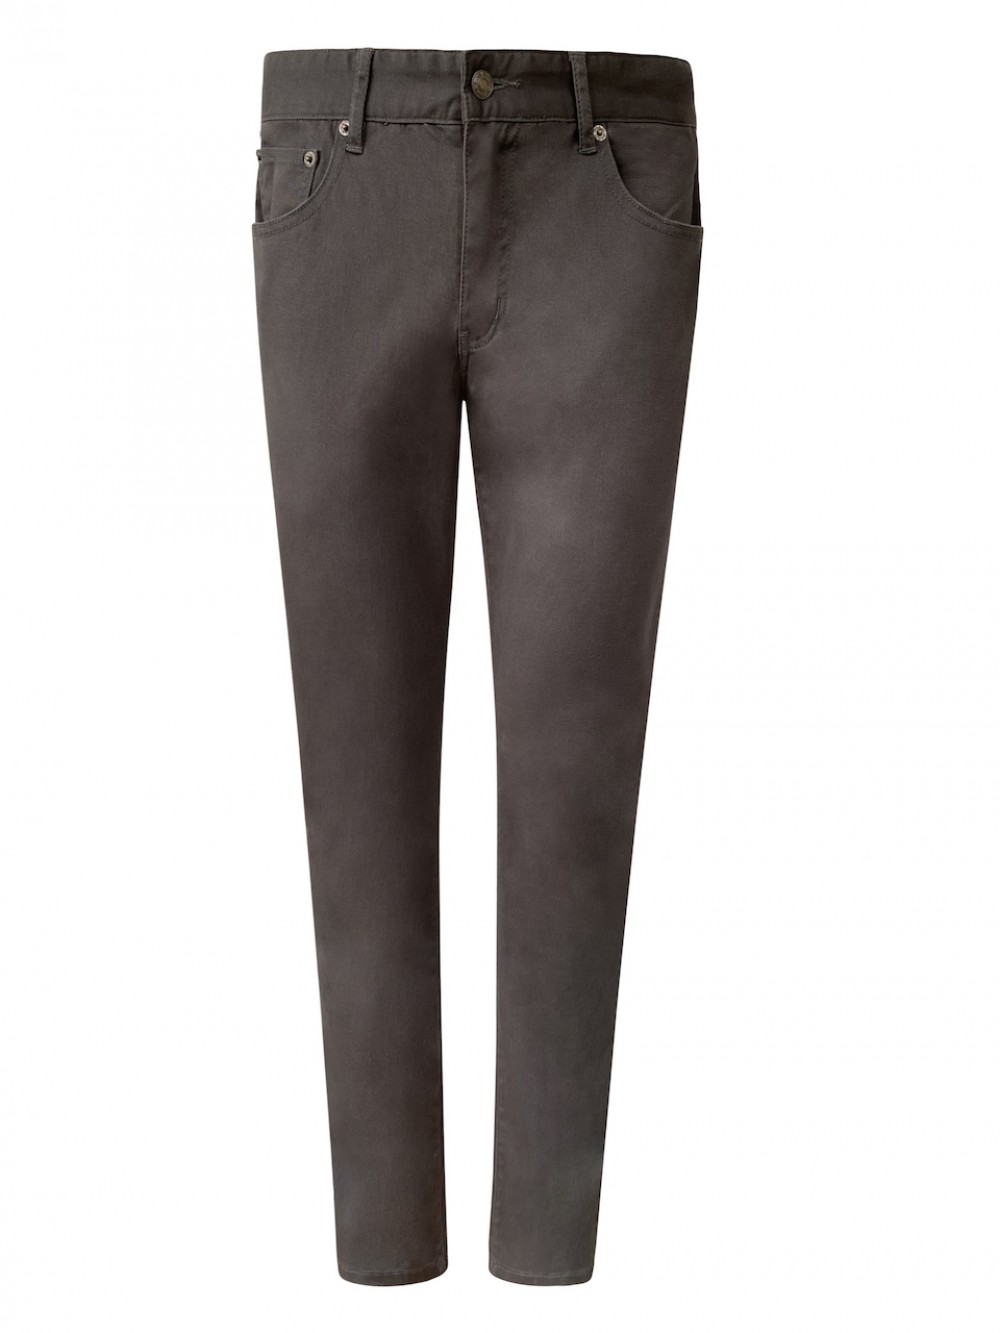 CHINOS JSM309 stretch straight fit - charcoal grey